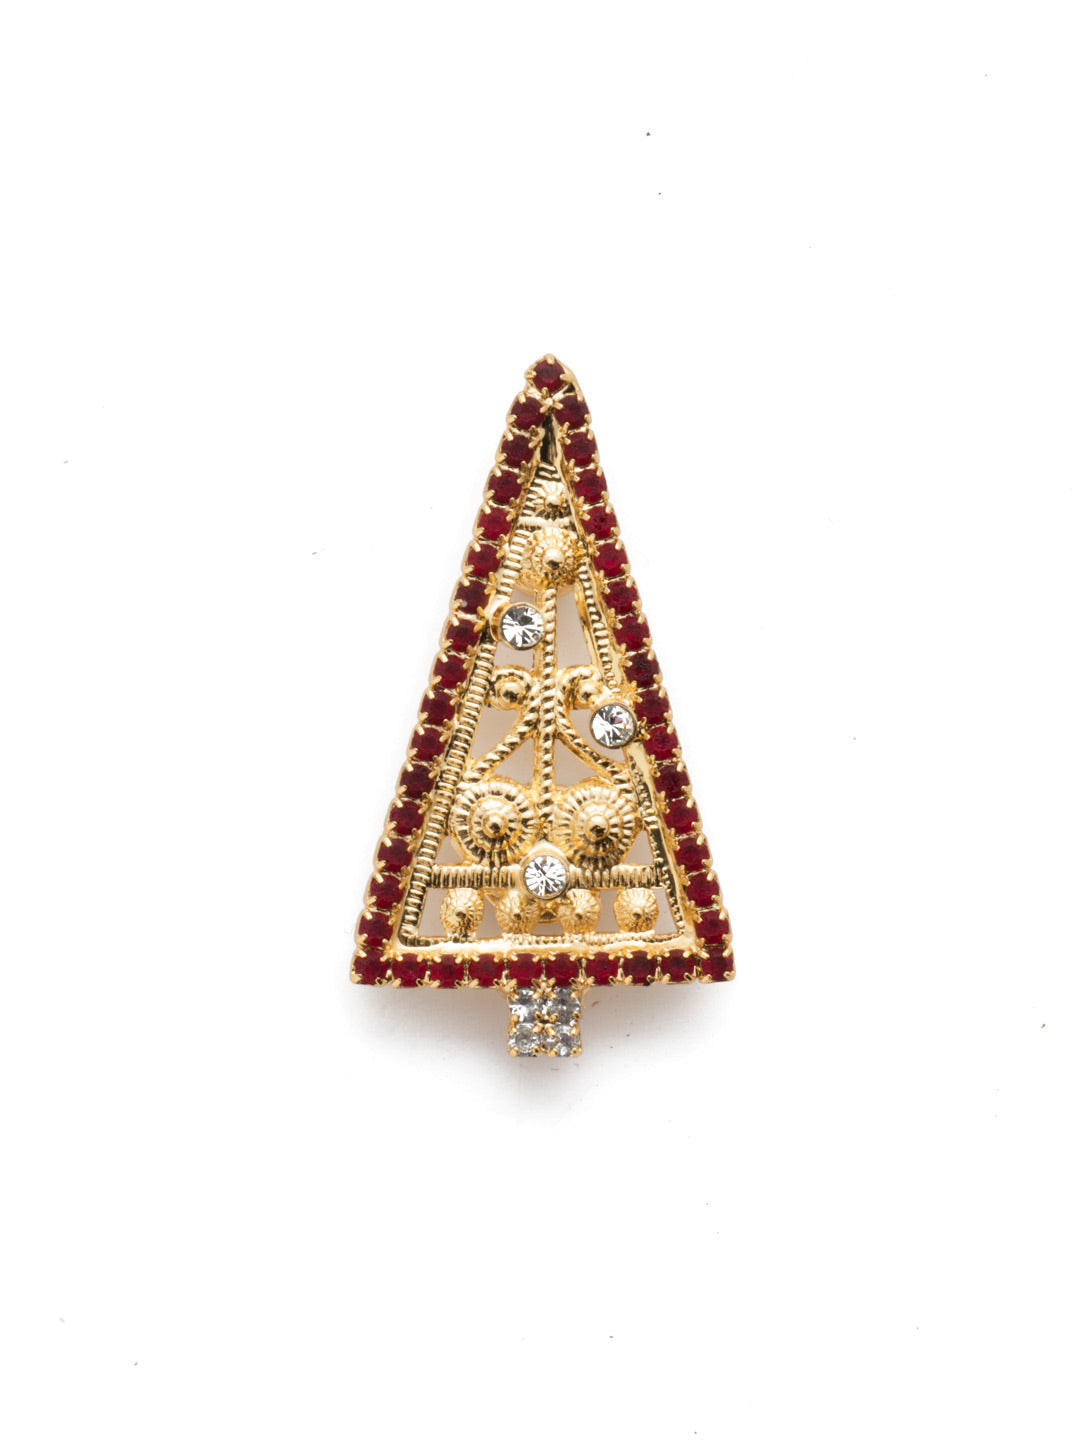 Spruce Magnetic Charm - CHM7BGRM - <p>The Spruce Magnetic Charm will make you feel jolly when bag, blazer, dress or refrigerator. The charm is covered in mulipule colored crystals that resemble a christmas tree. From Sorrelli's Red Multi collection in our Bright Gold-tone finish.</p>